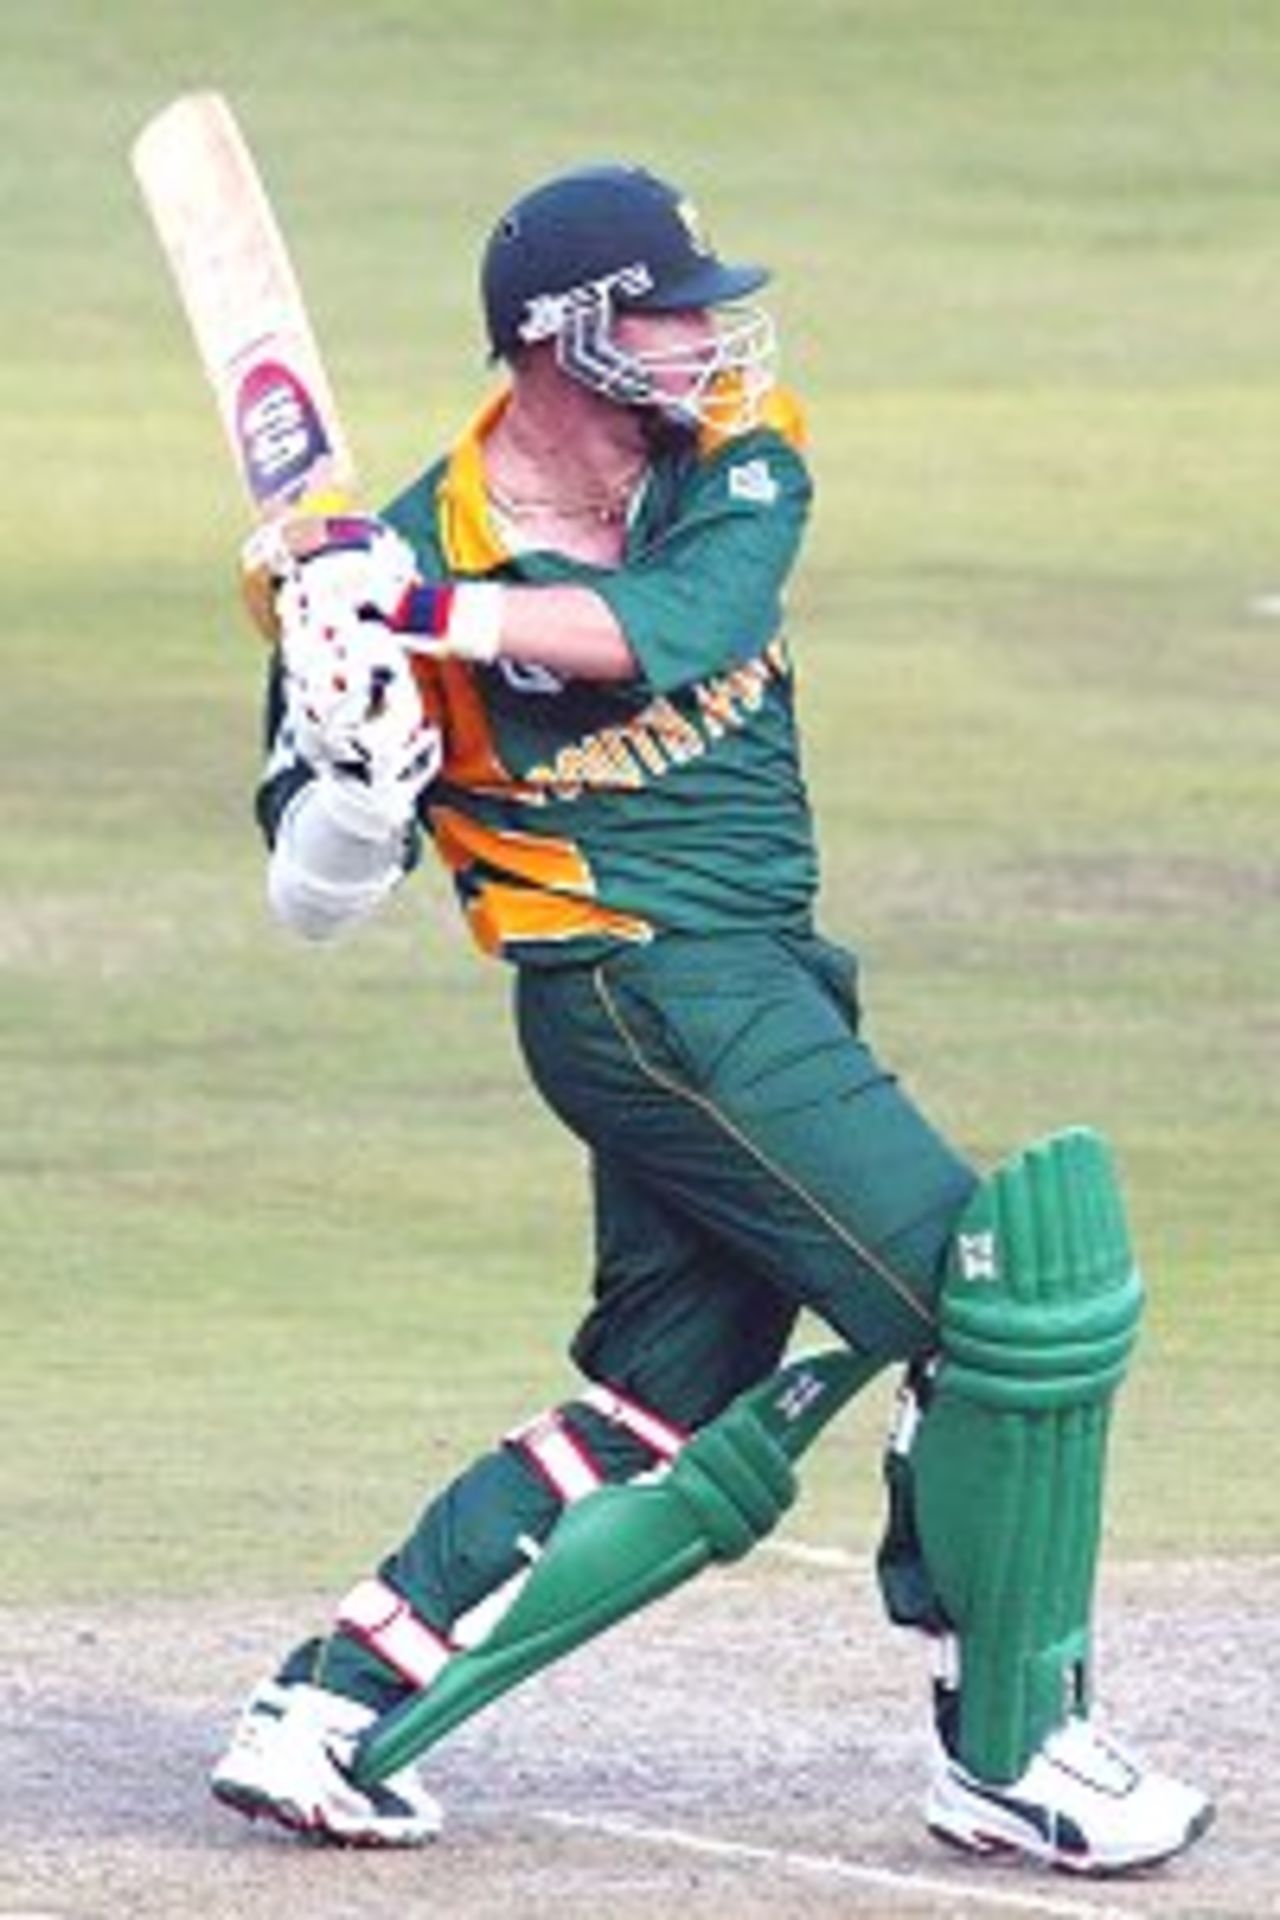 22 Mar 2002: Lance Klusener of South Africa in action during the first one day international between South Africa and Australia, played at the Wanderers, Johannesburg, South Africa.